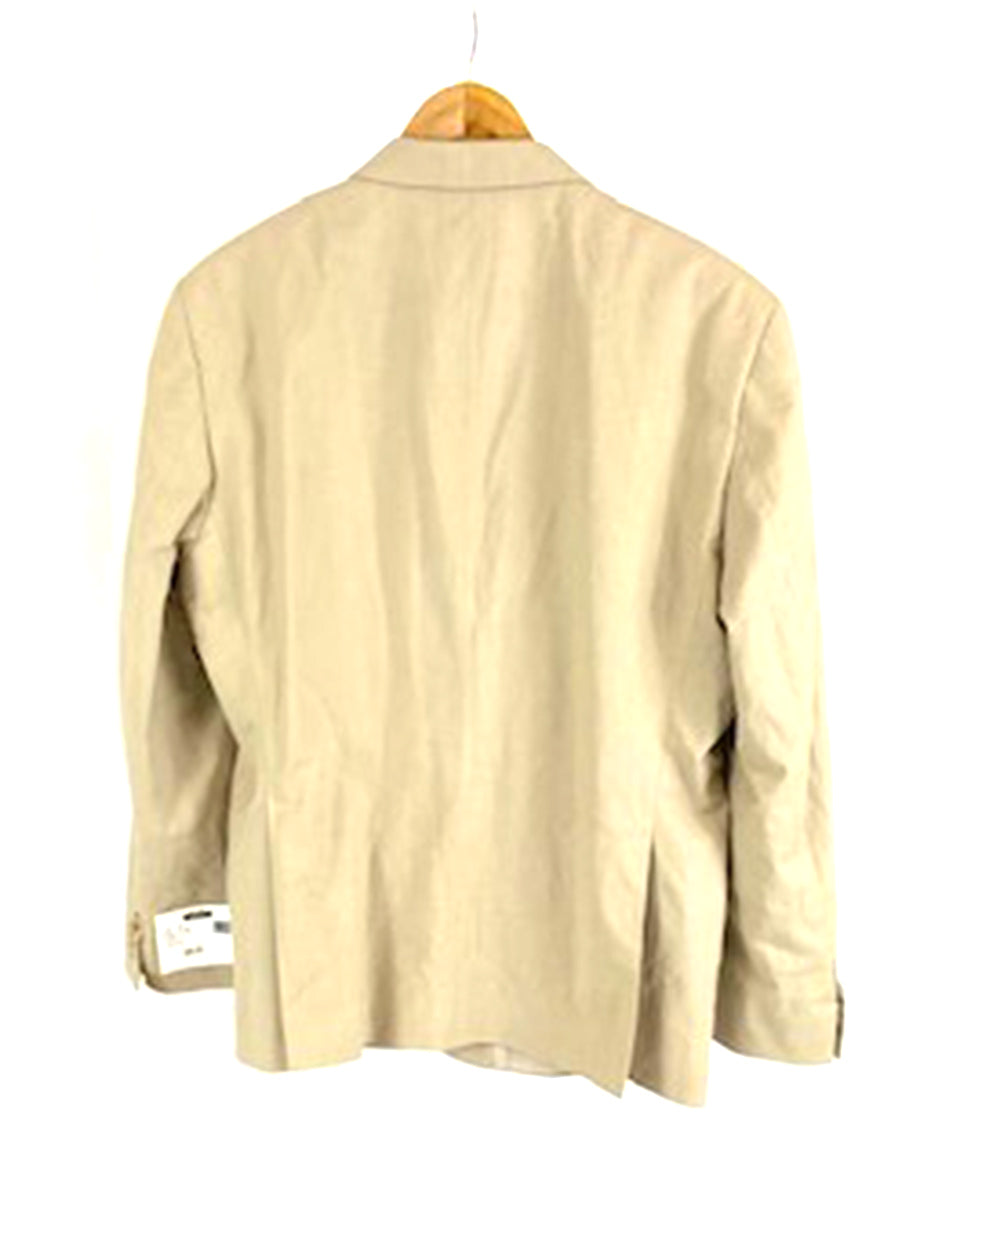 Kenneth Cole Unlisted Beige Cotton Jacket